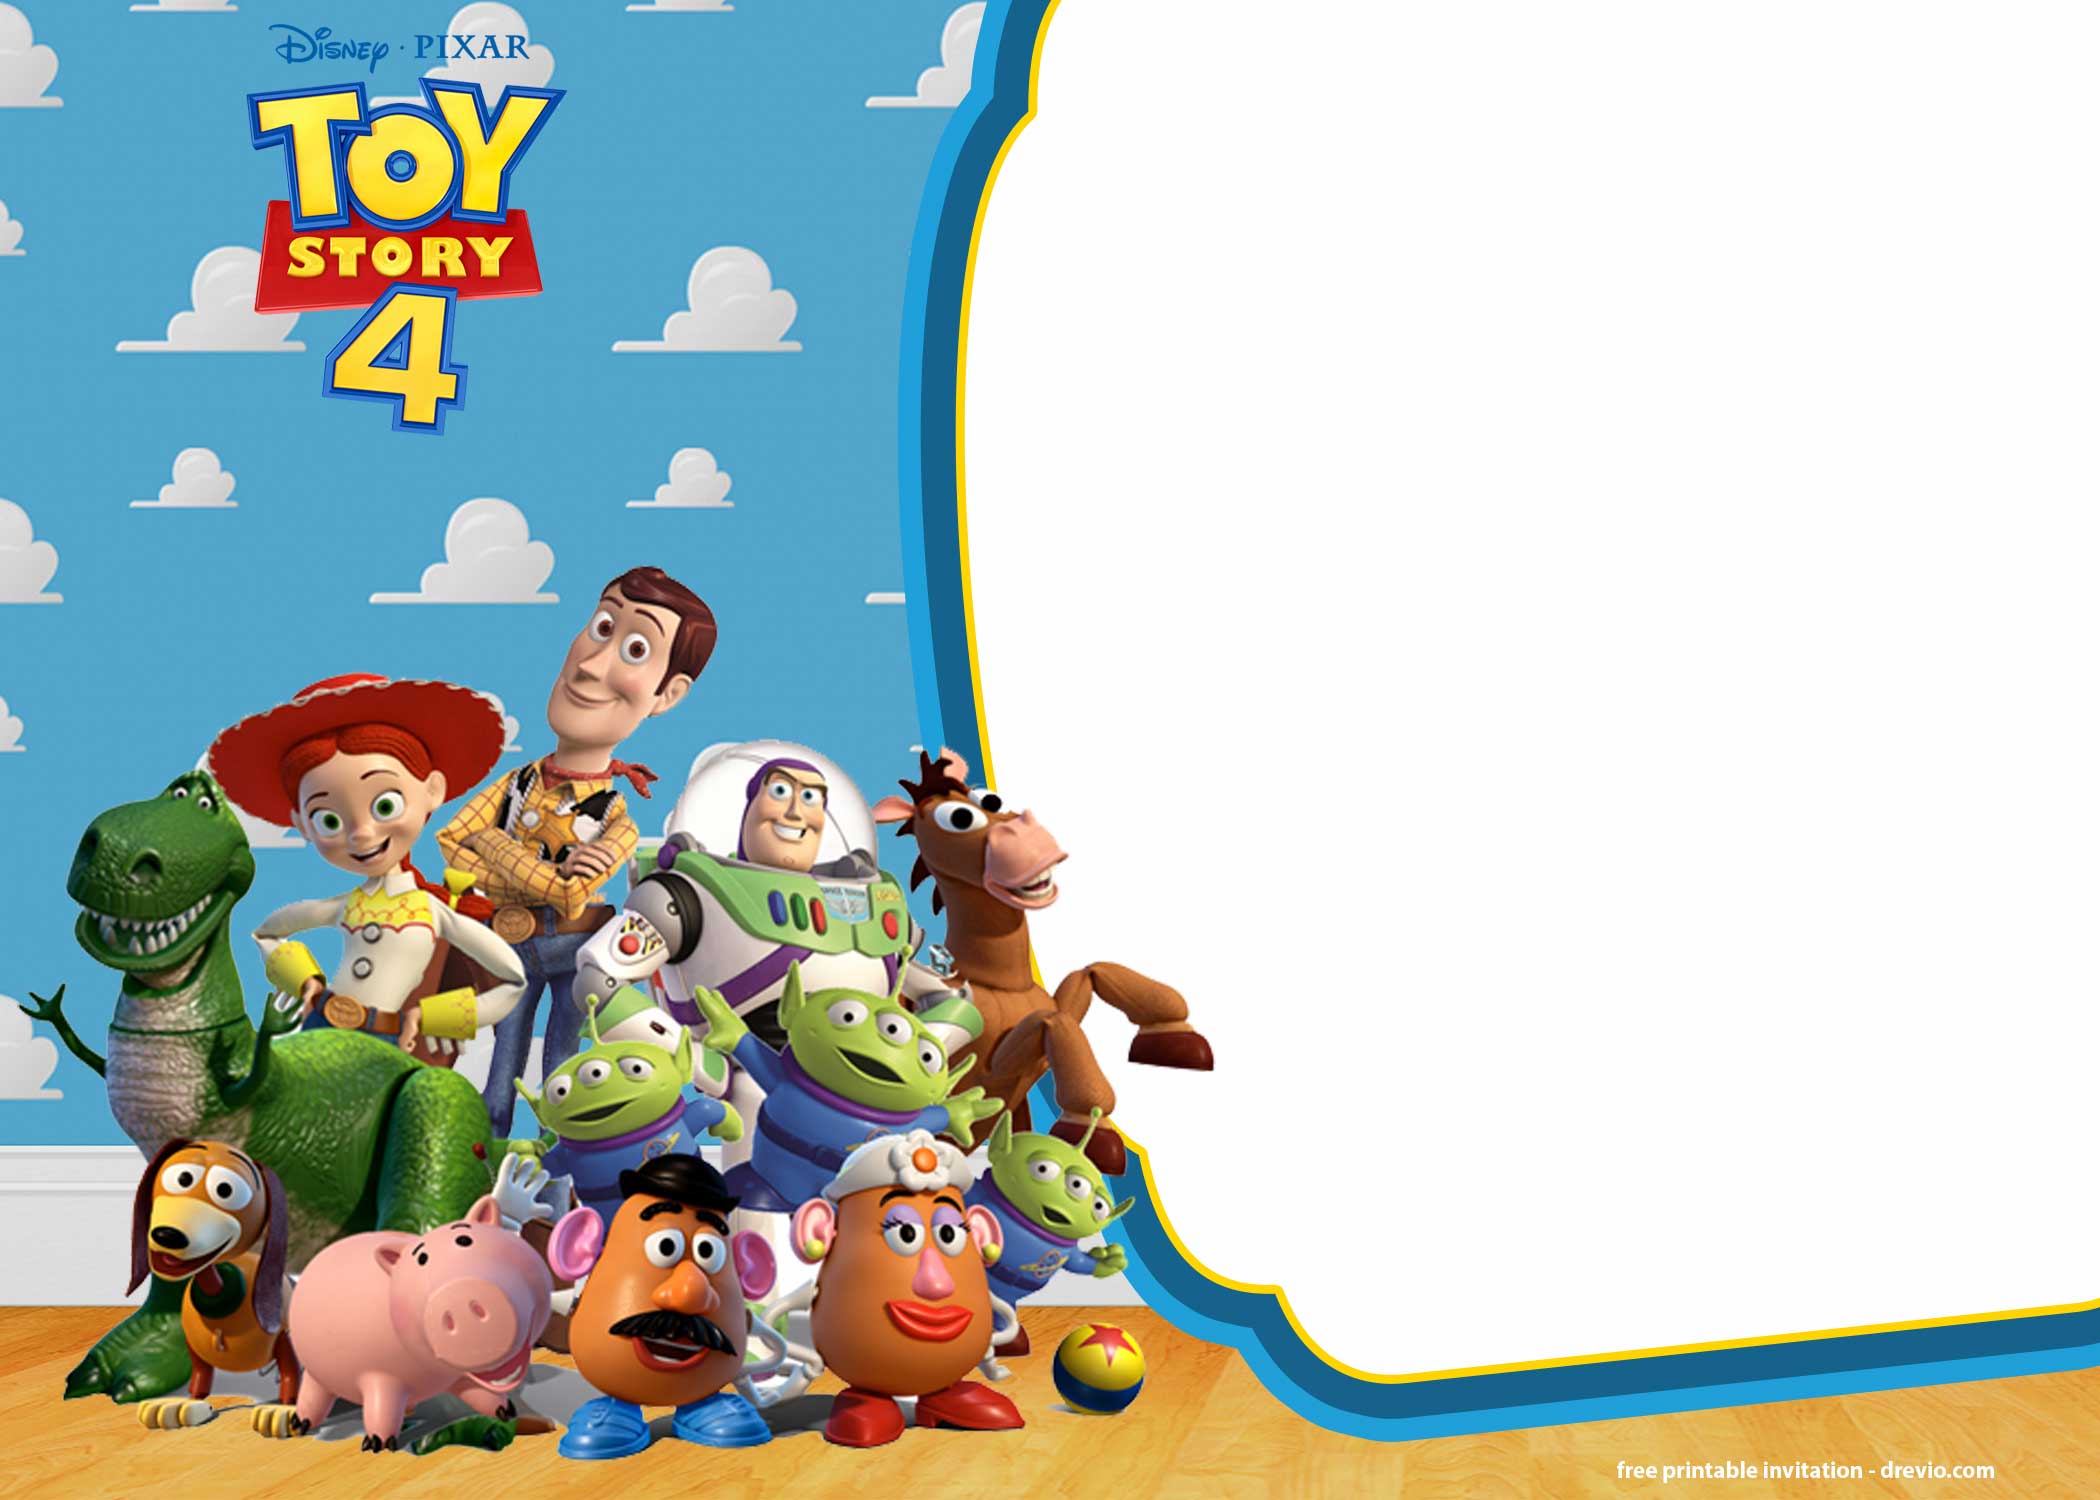 Toy Story Invitation-Toy Story Invite-Disney Pixar Toy Story Invitation-Toy Story Birthday Party-Woody-Buzz-Toy Story Party-Personalized